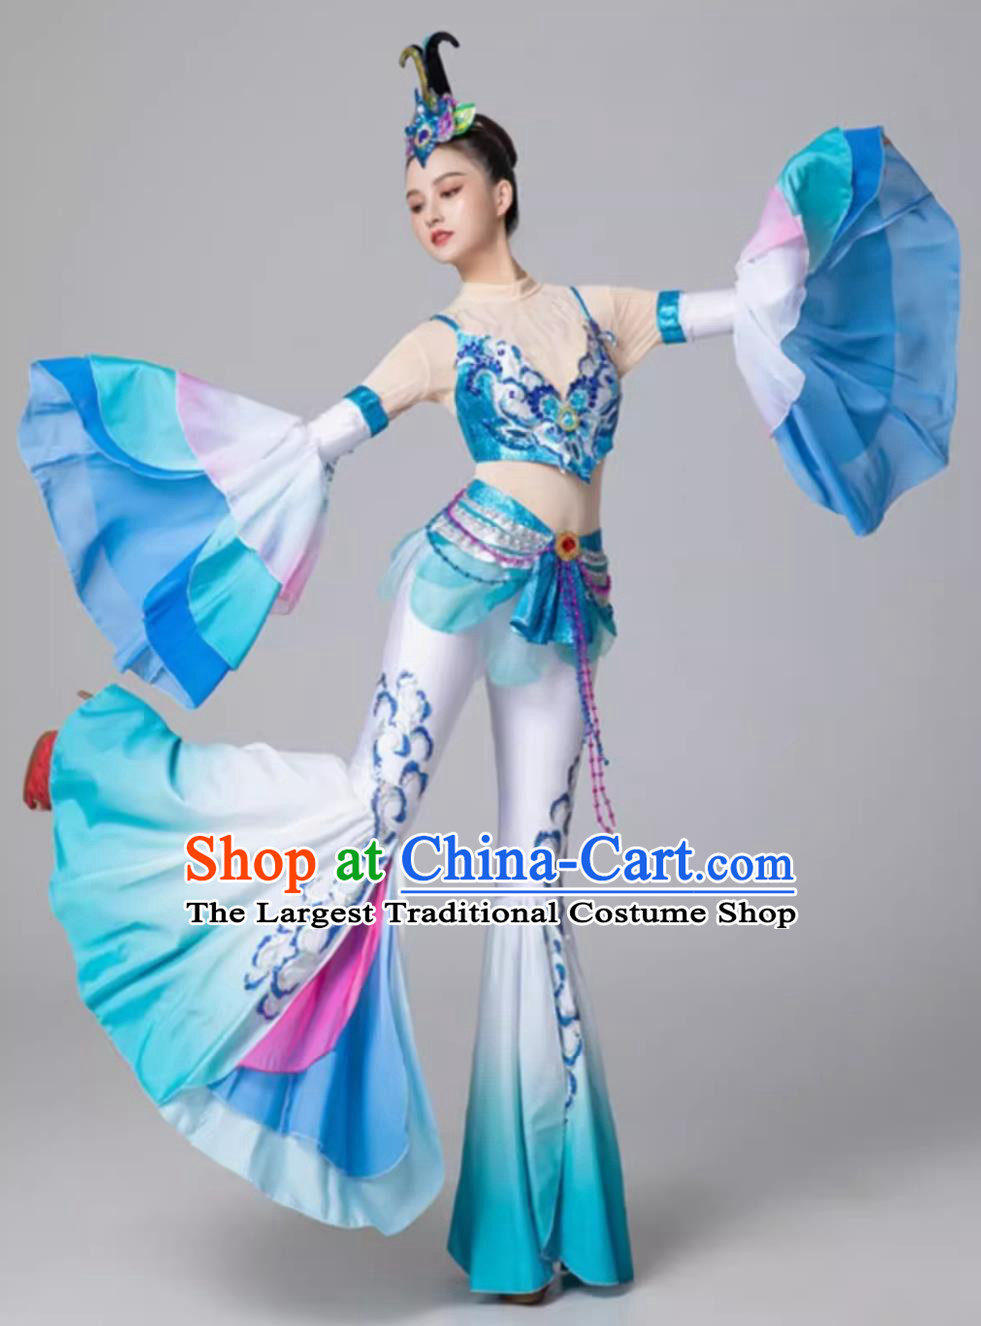 Ancient Chinese Super Immortal Classical Dance Dress Dunhuang Feitian Dance Costume Exotic Performance Clothing